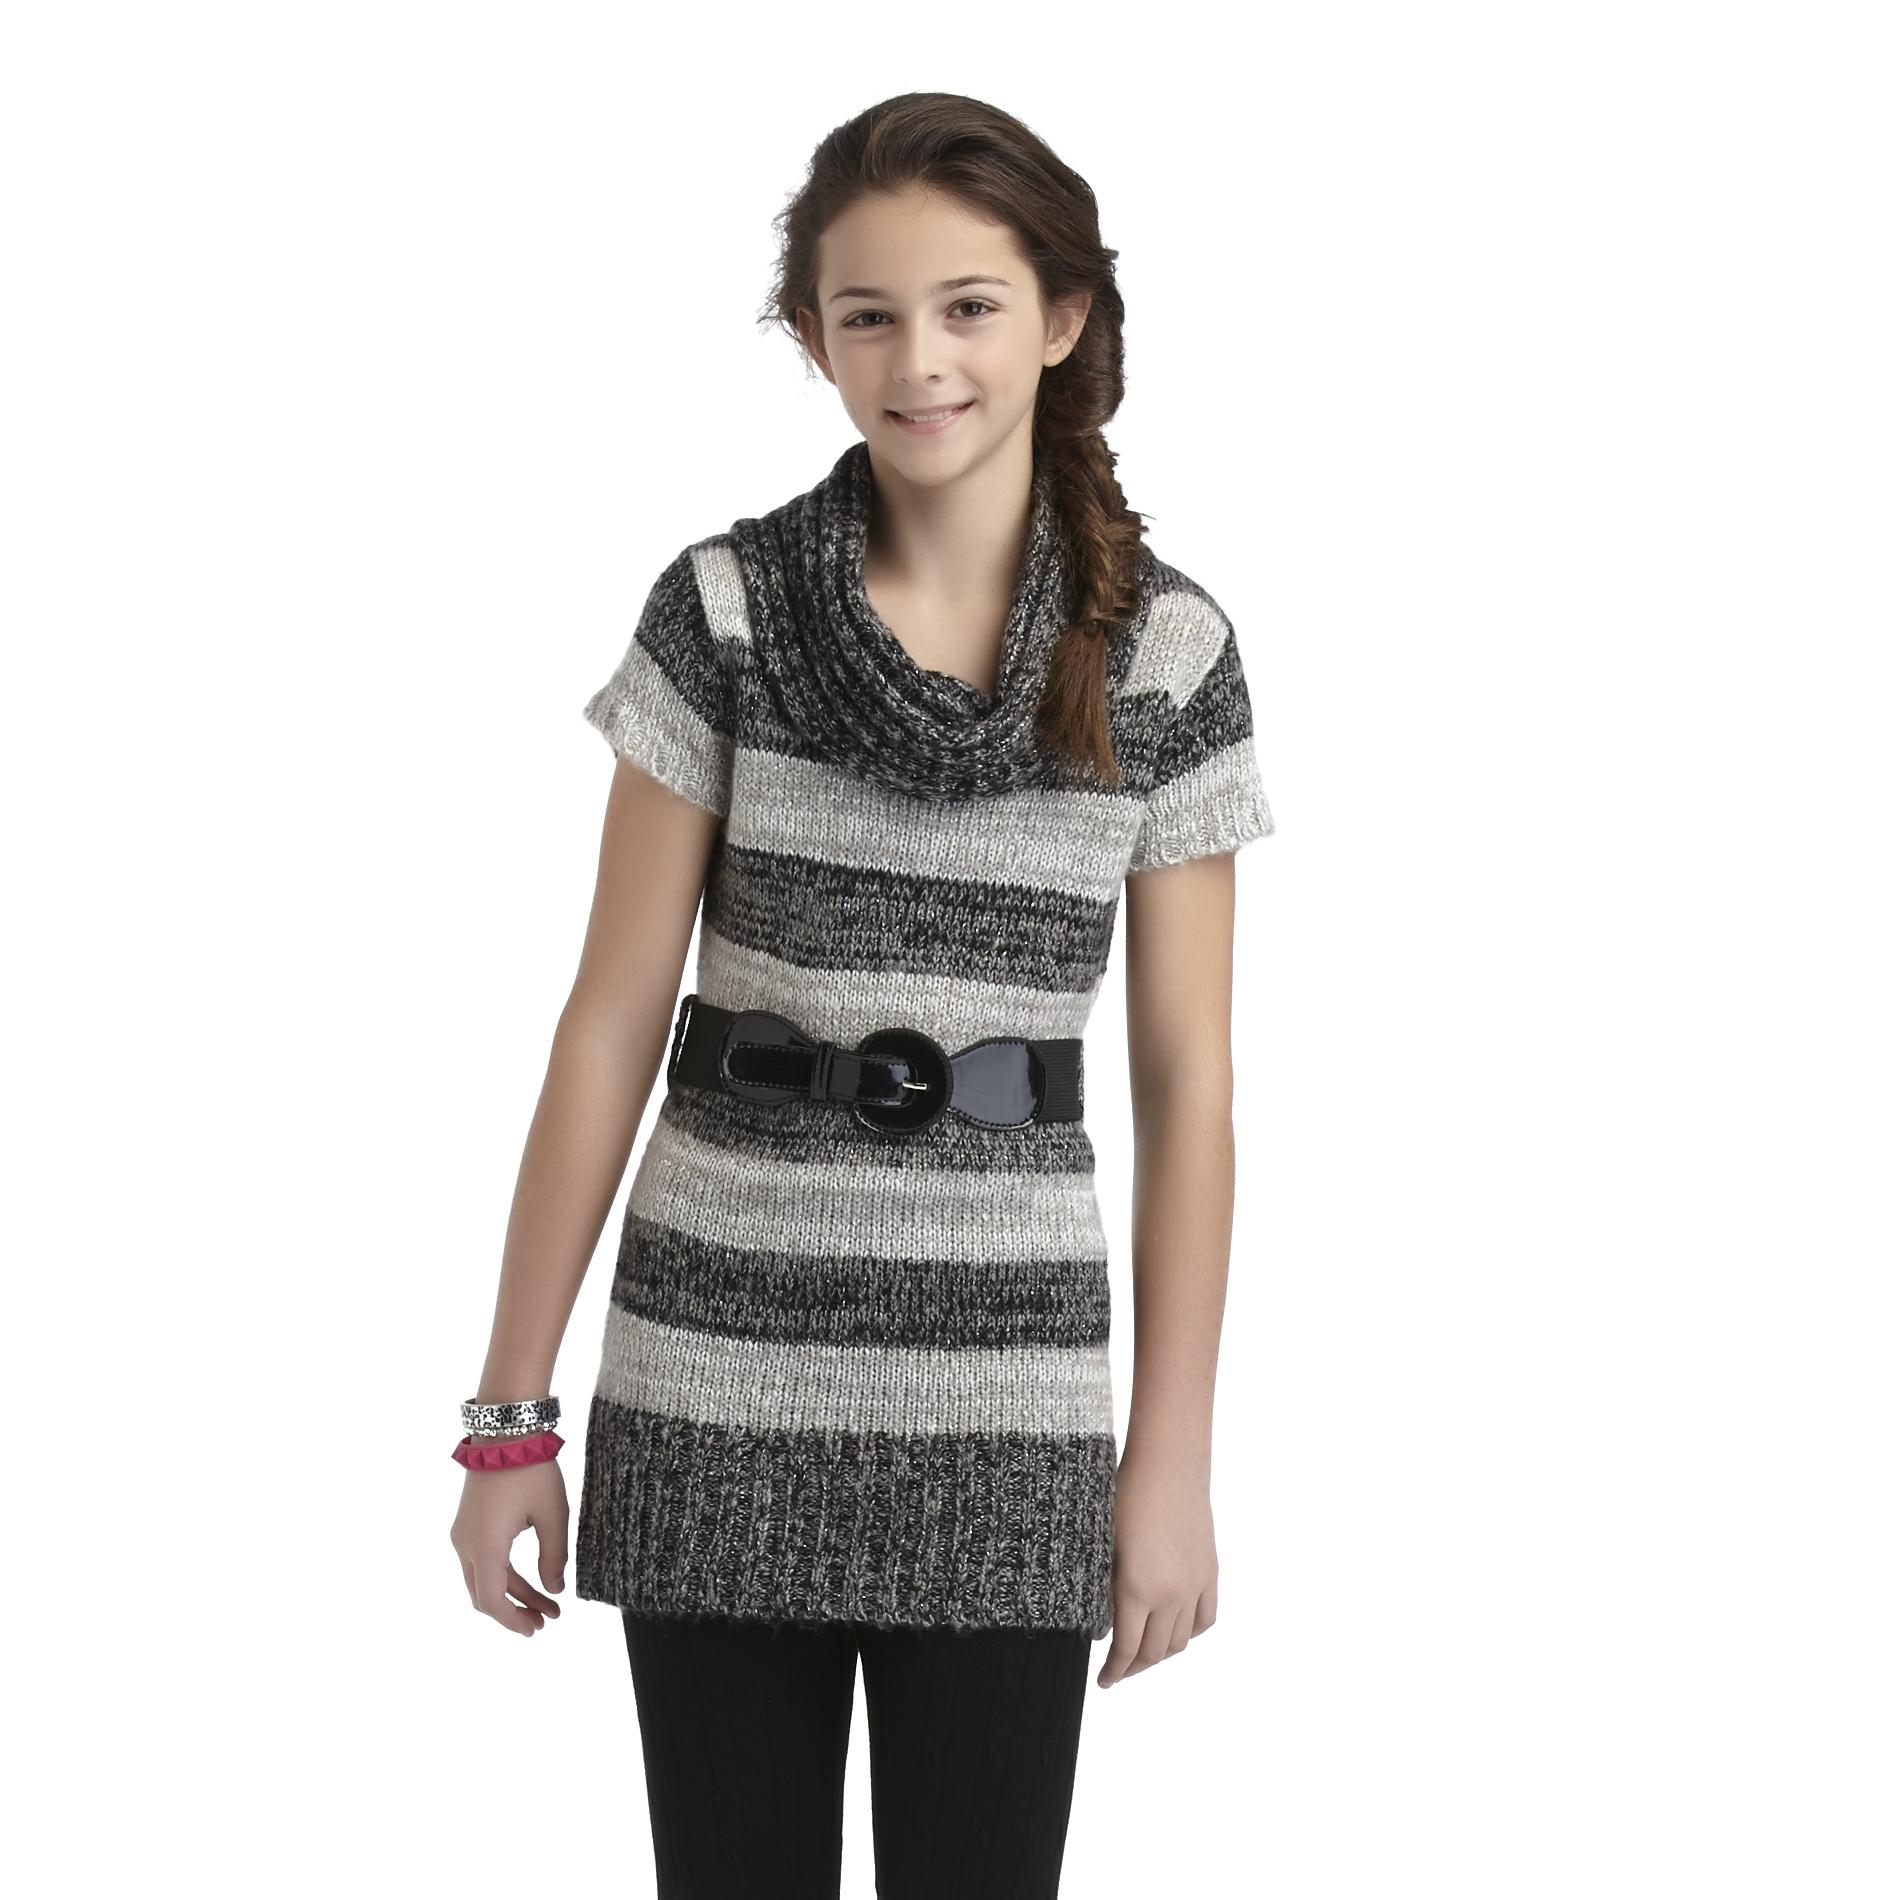 Sweater Project Girl's Cowl Neck Tunic Sweater & Belt - Striped